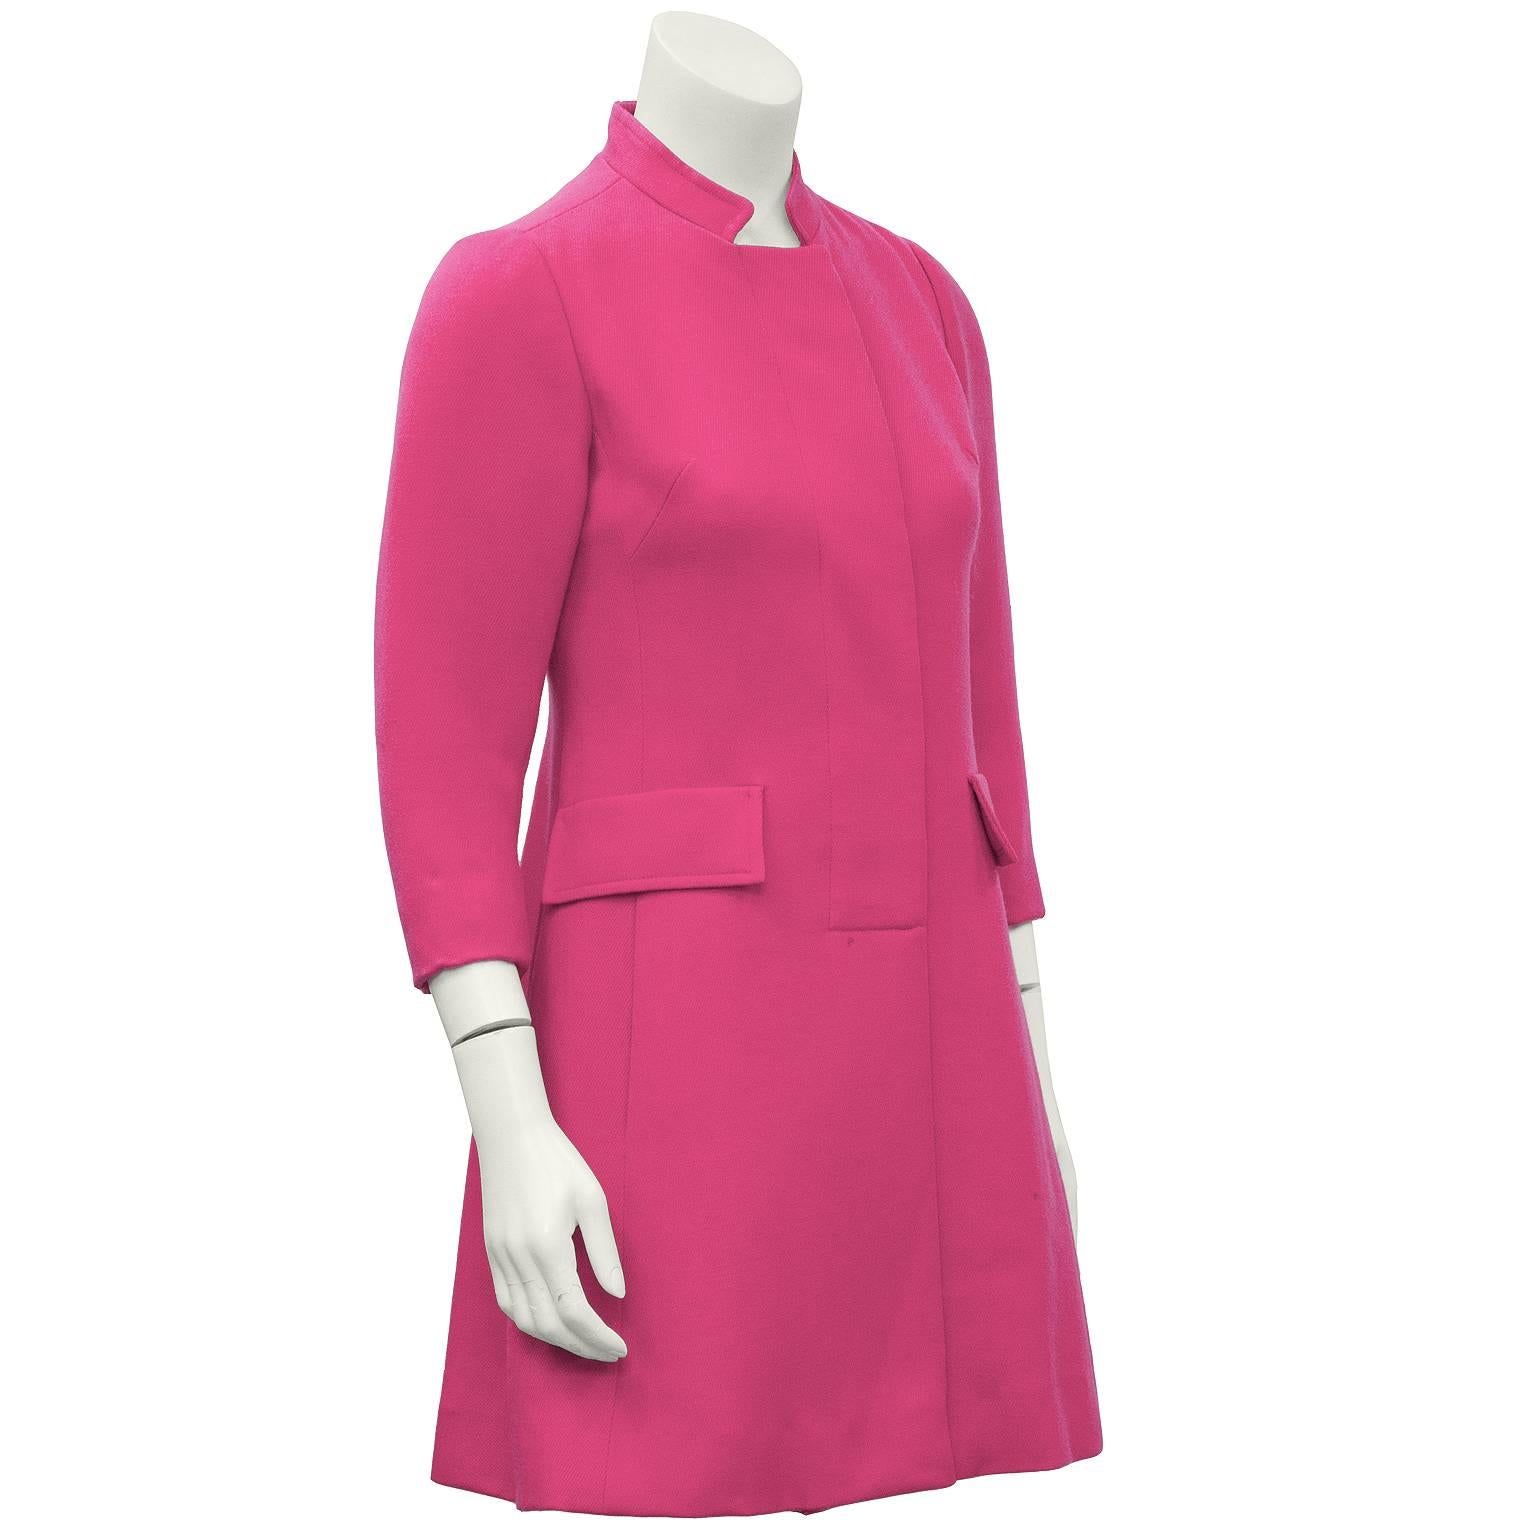 Canadian designer John Warden hot pink wool mini gabardine A-line coat from the 1960’s. The coat has a mandarin style collar and closes with large white buttons that are hidden behind a placket. Bracelet length sleeves, darts at the bust and faux